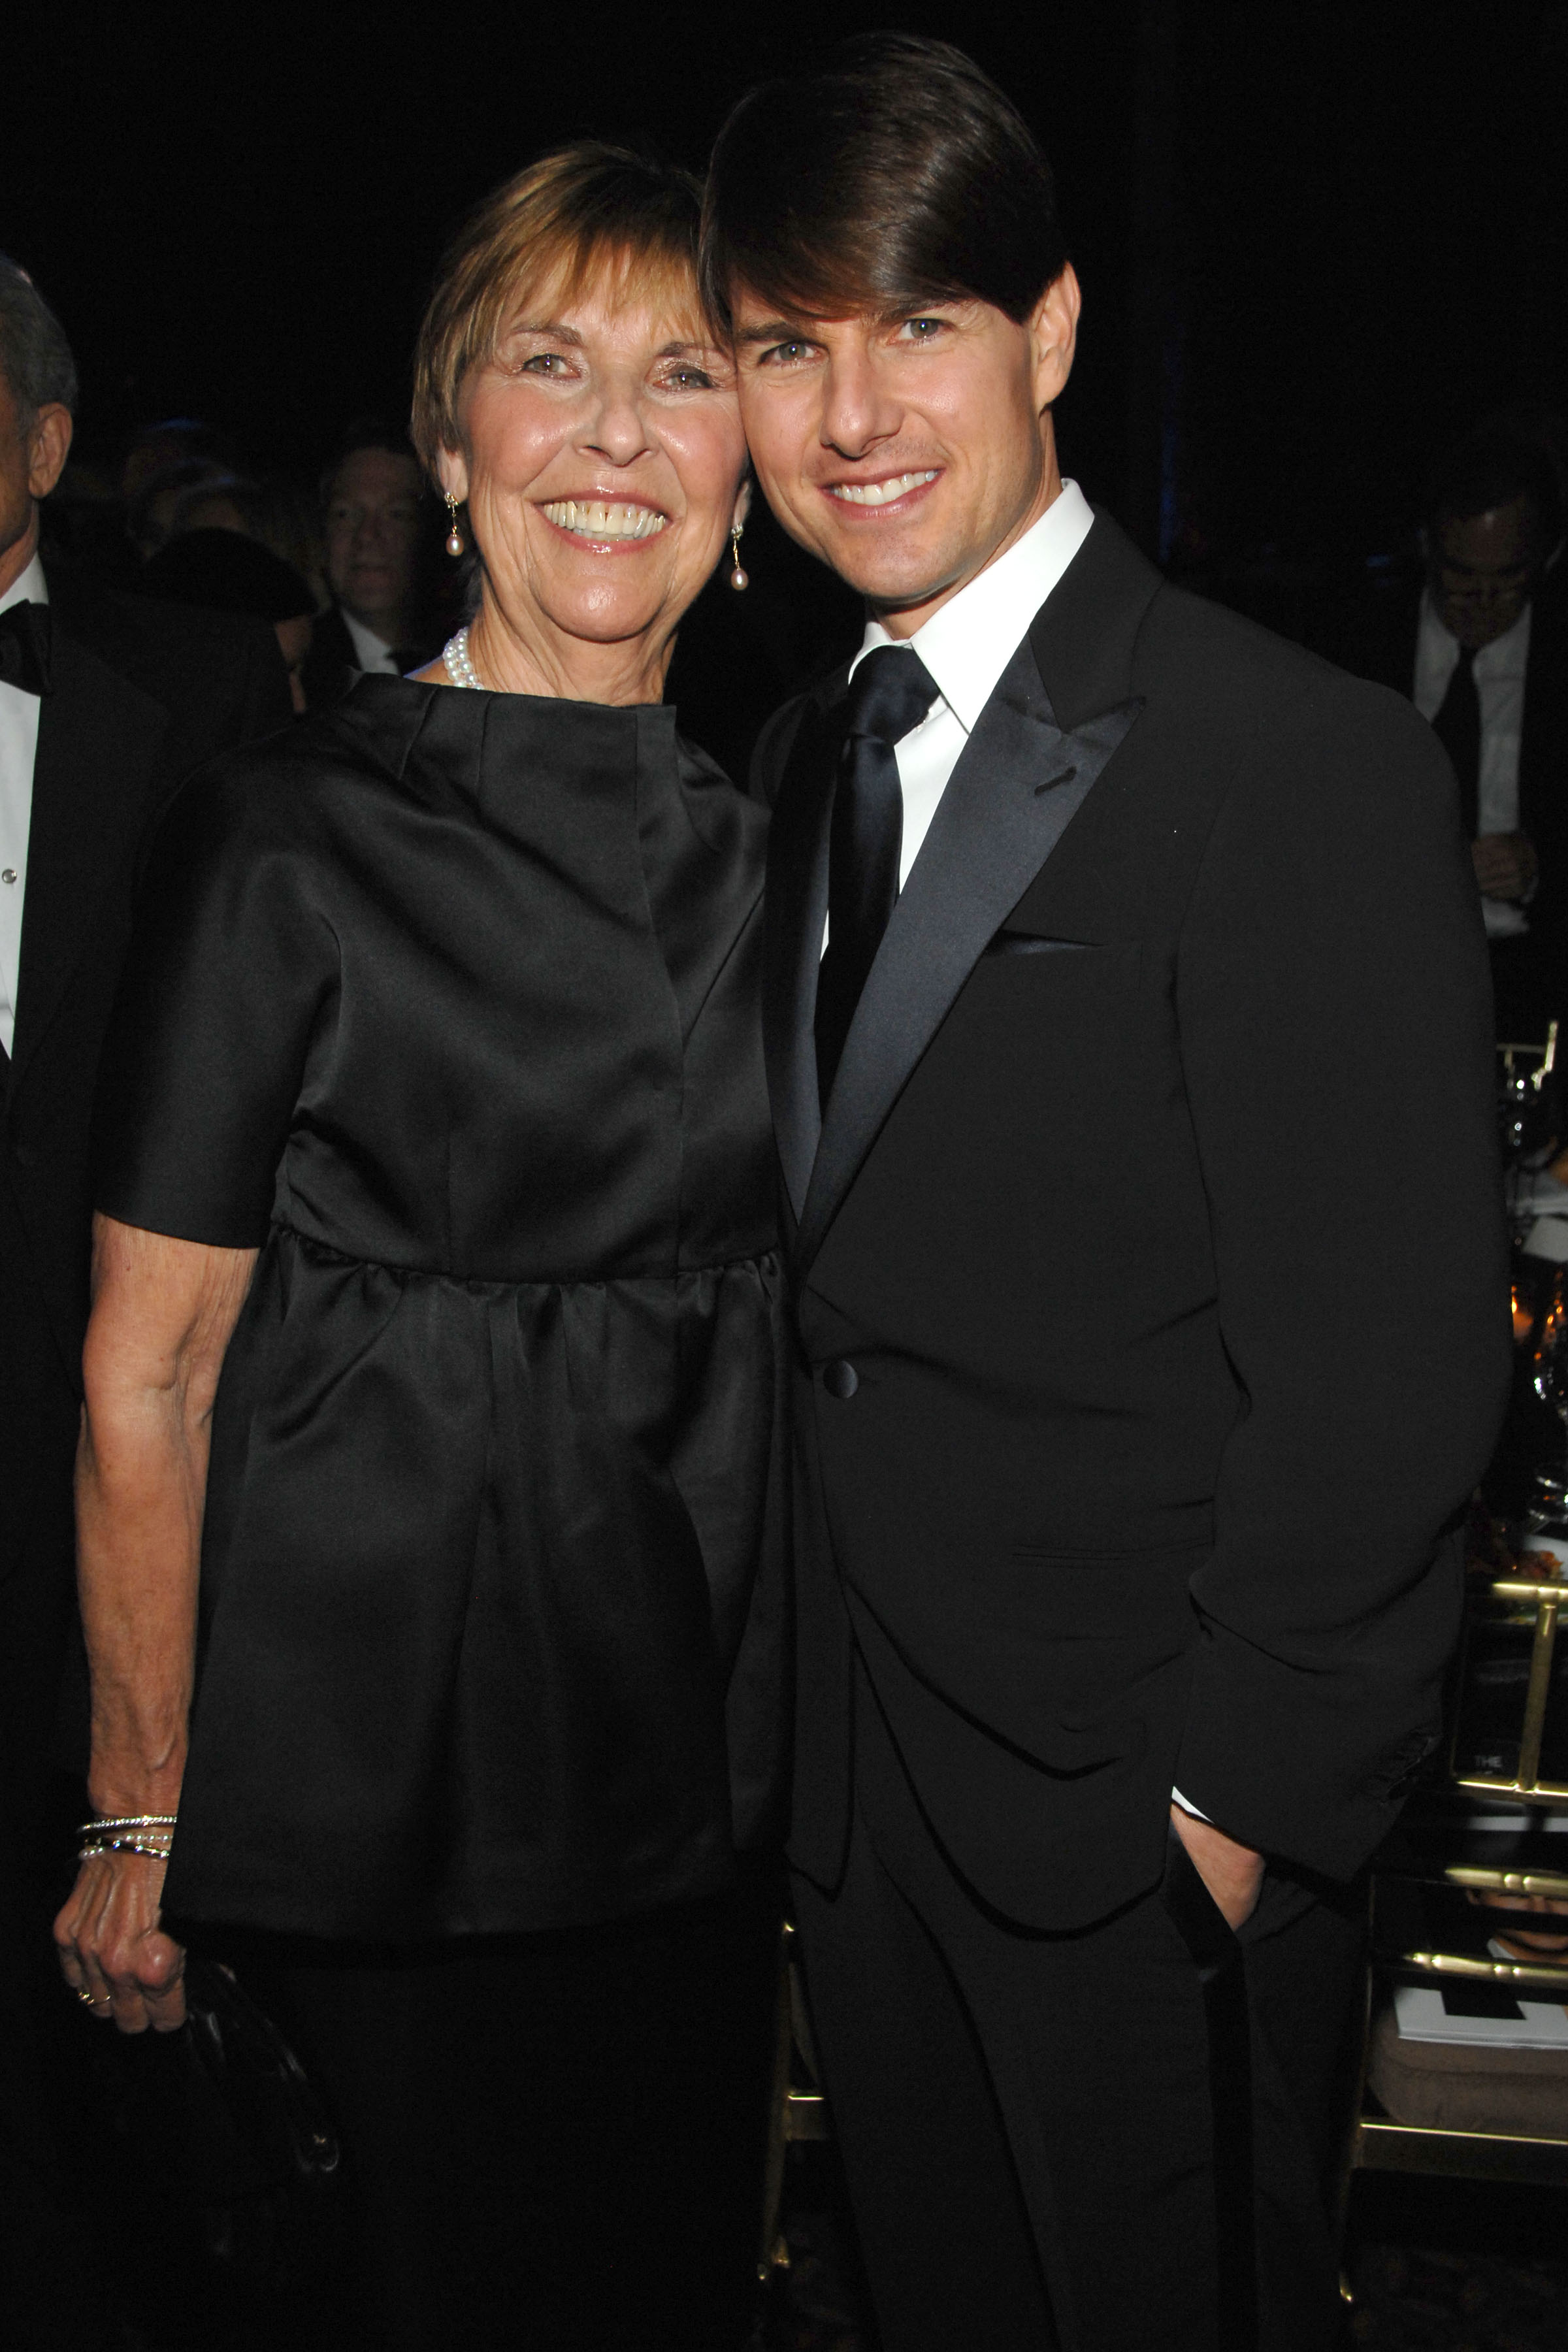 Mary Lee South and Tom Cruise attend MUSEUM OF THE MOVING IMAGE SALUTES TOM CRUISE in New York City, on November 6, 2007. | Source: Getty Images